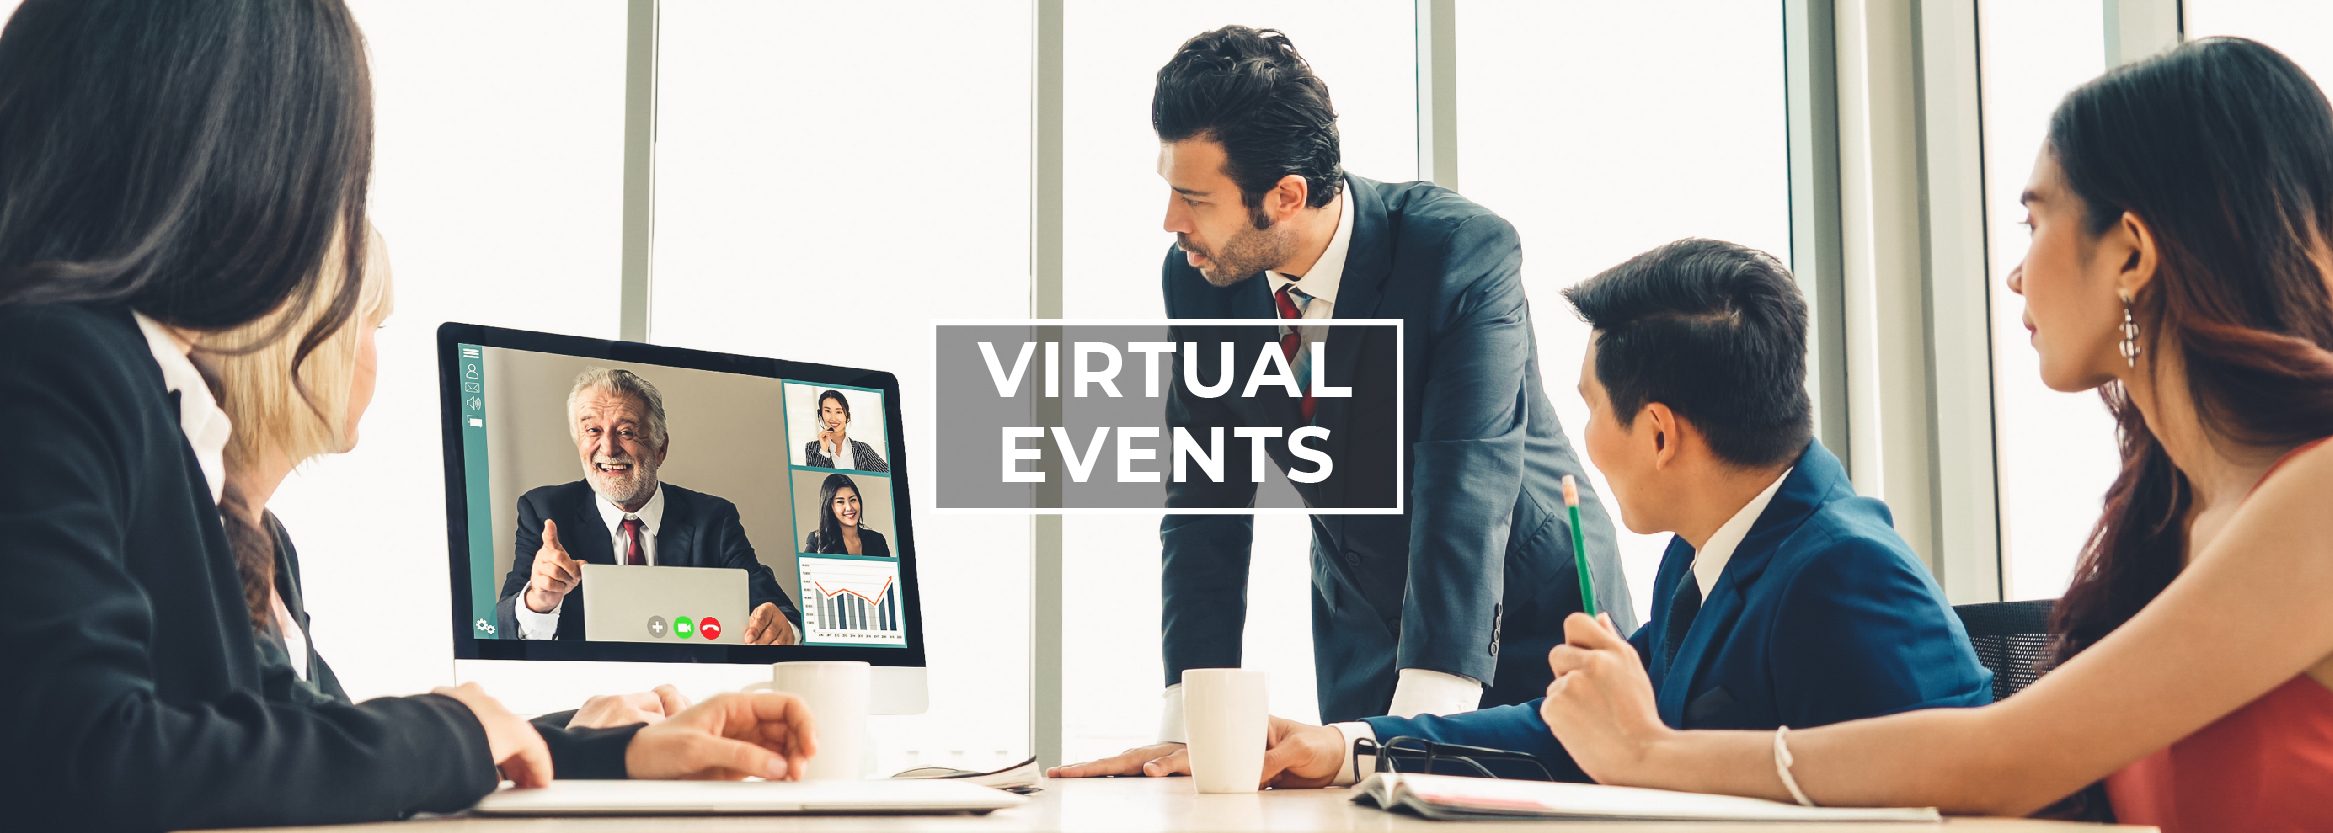 Virtual Events Statistic